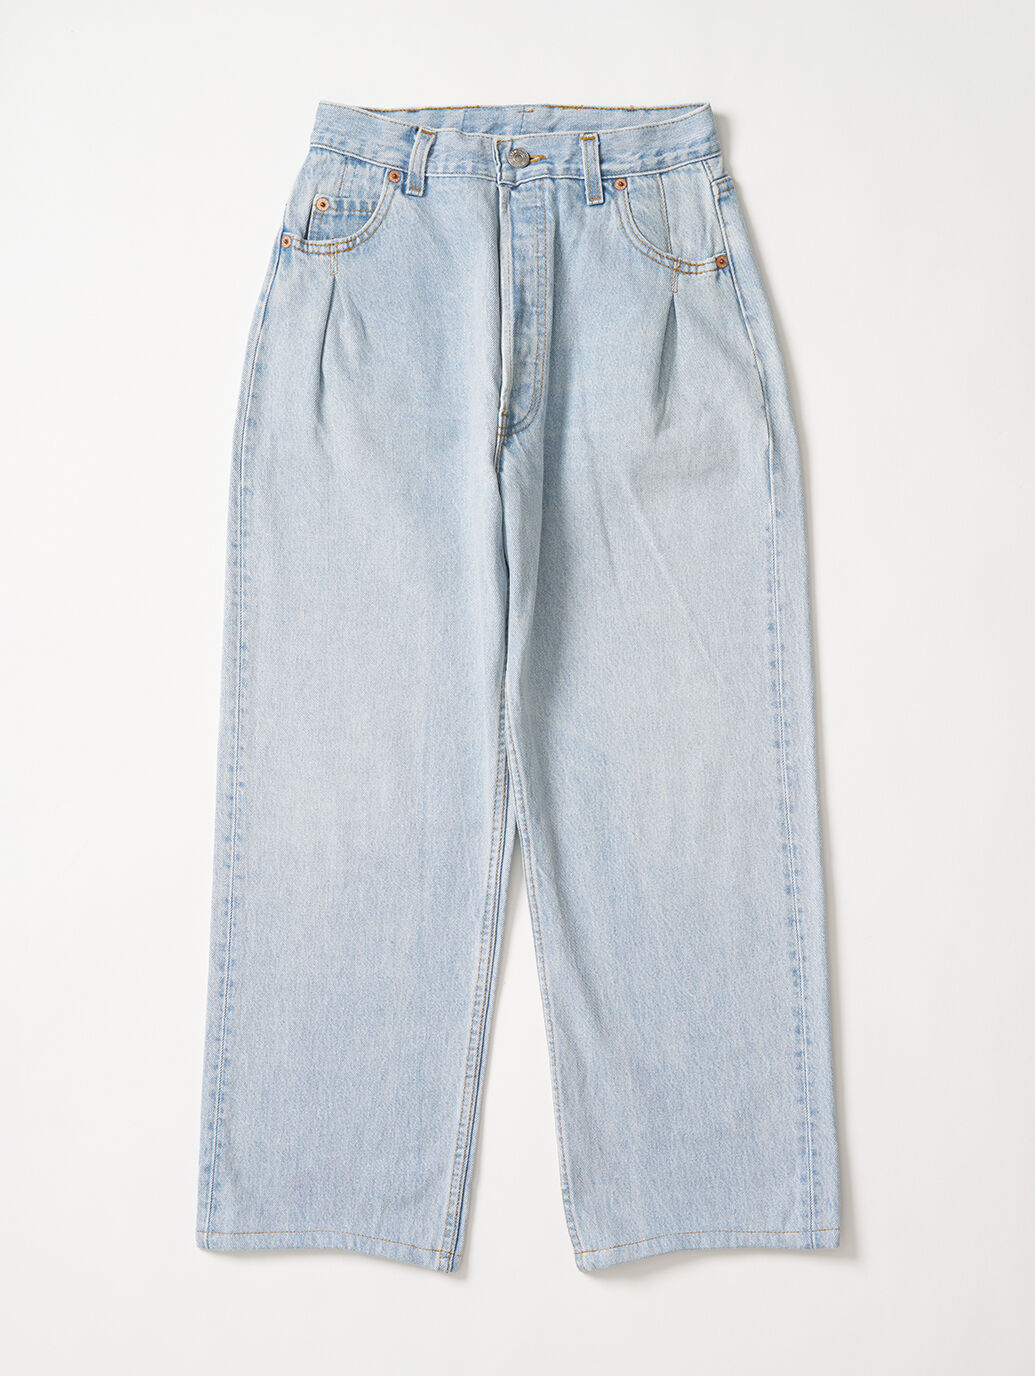 LEVI'S® AUTHORIZED VINTAGE MADE IN THE USA PLEATED パンツ 